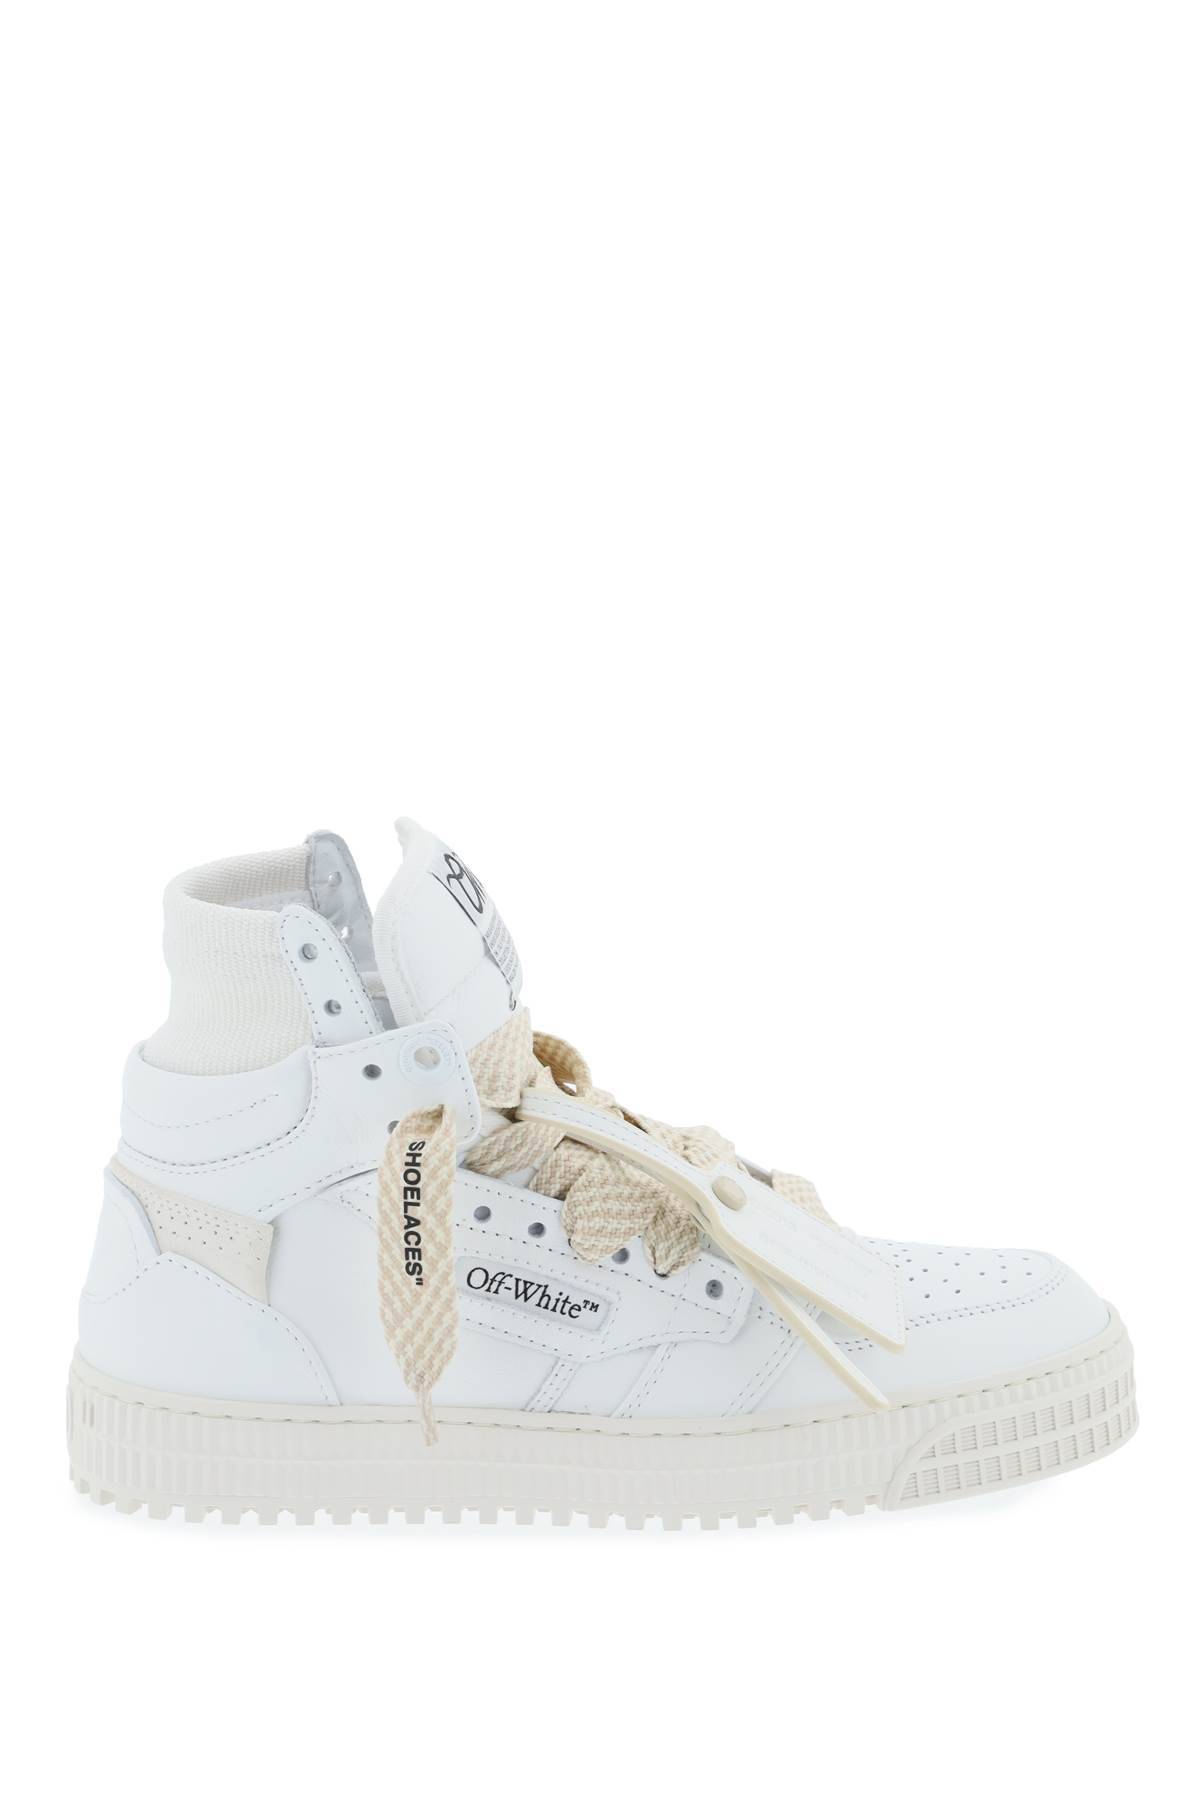 OFF-WHITE OFF-WHITE 3.0 off-court sneakers